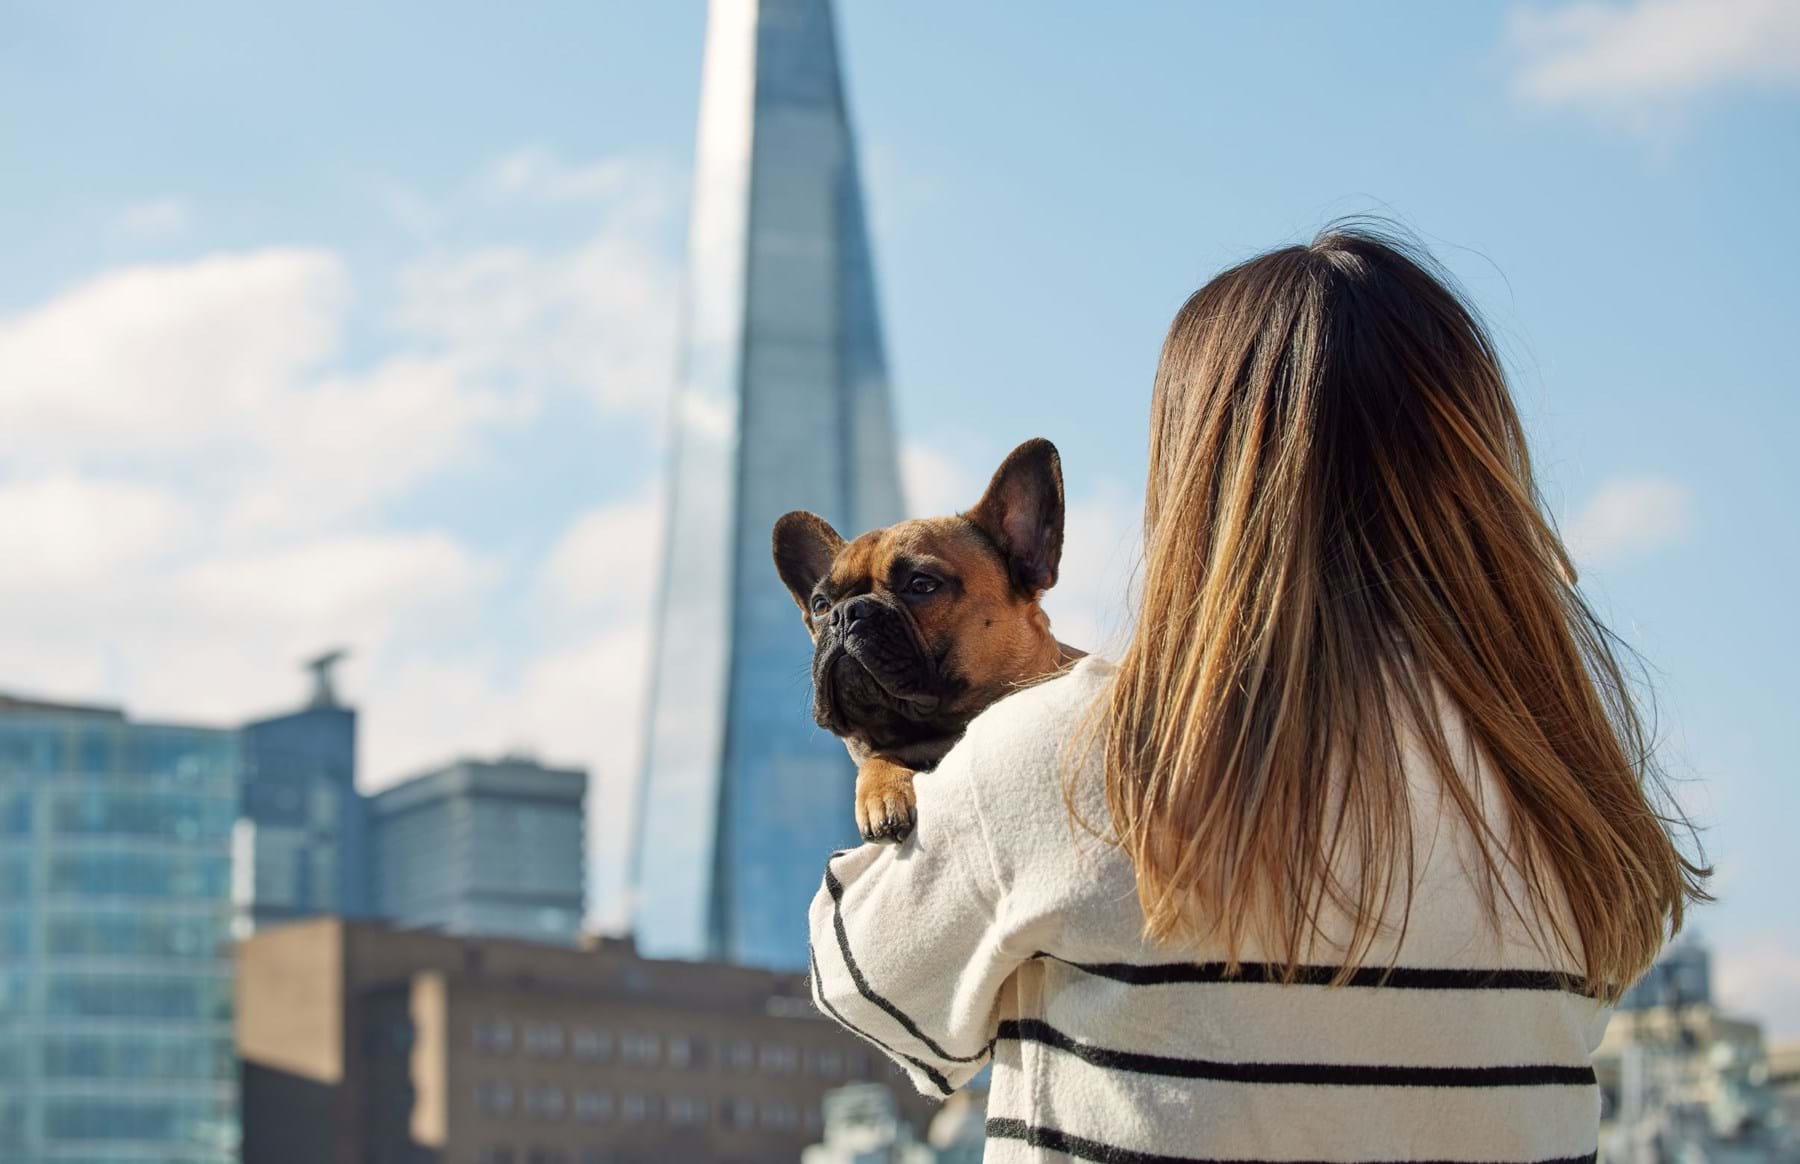 Customer with dog with The Shard in the background